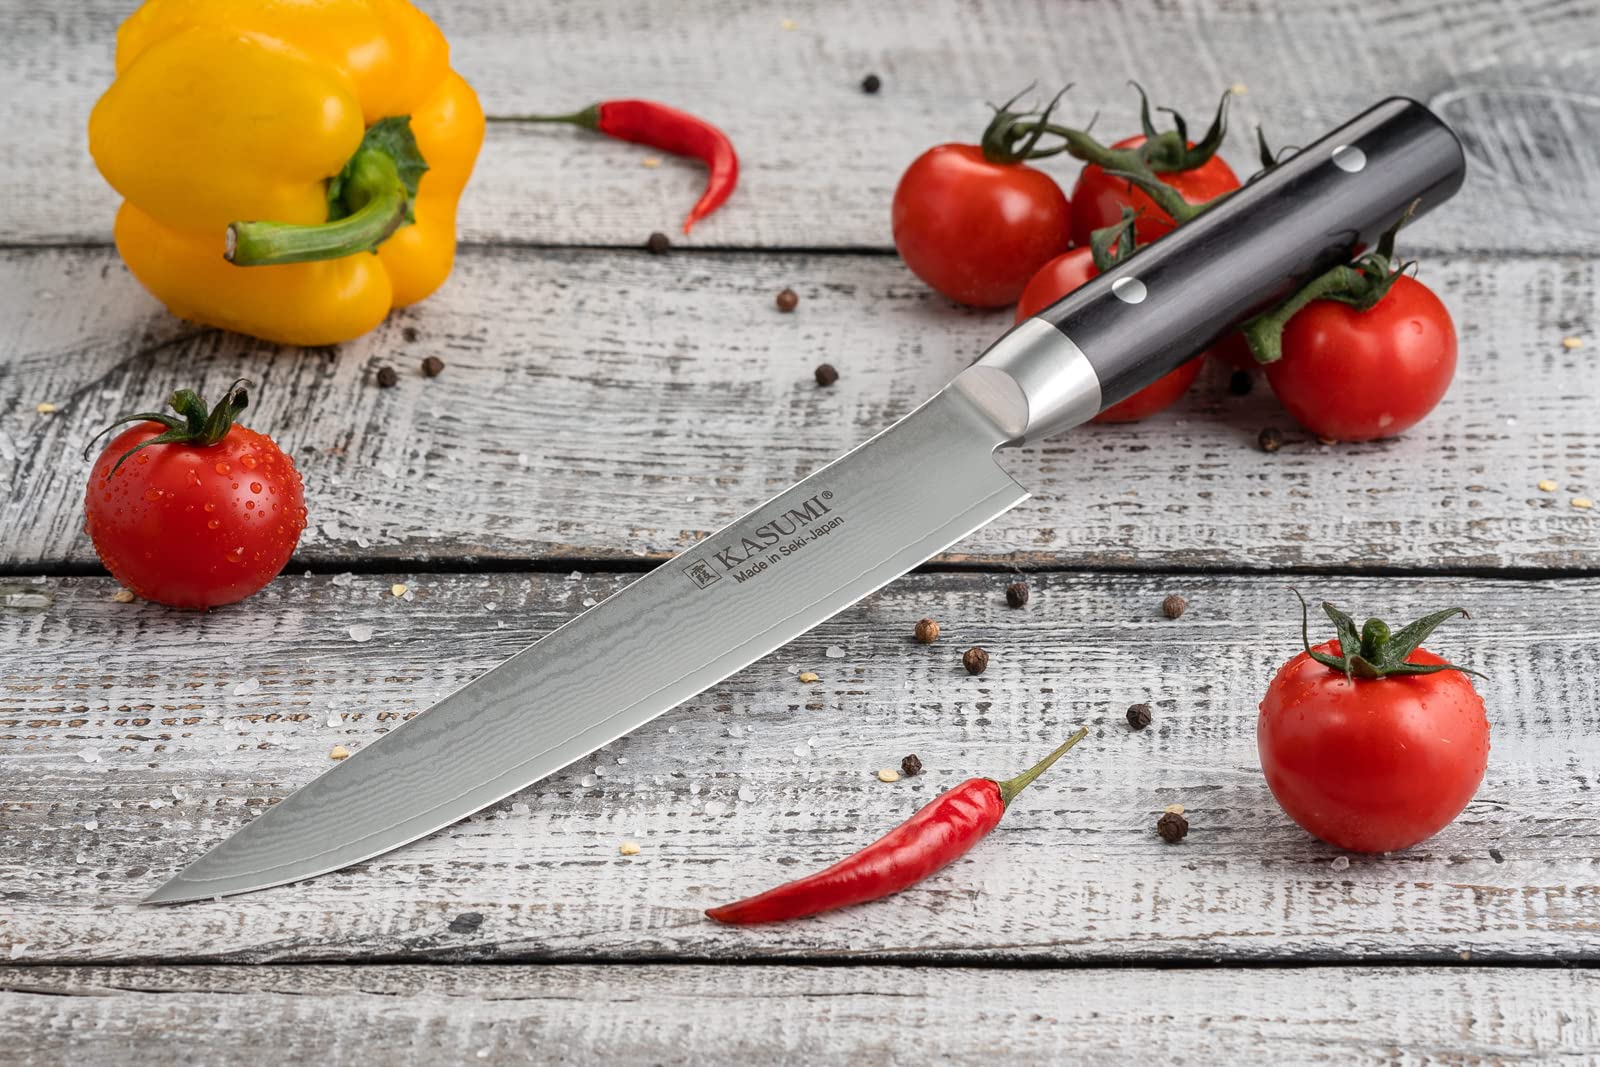 Kasumi - 8 inch Carving Knife